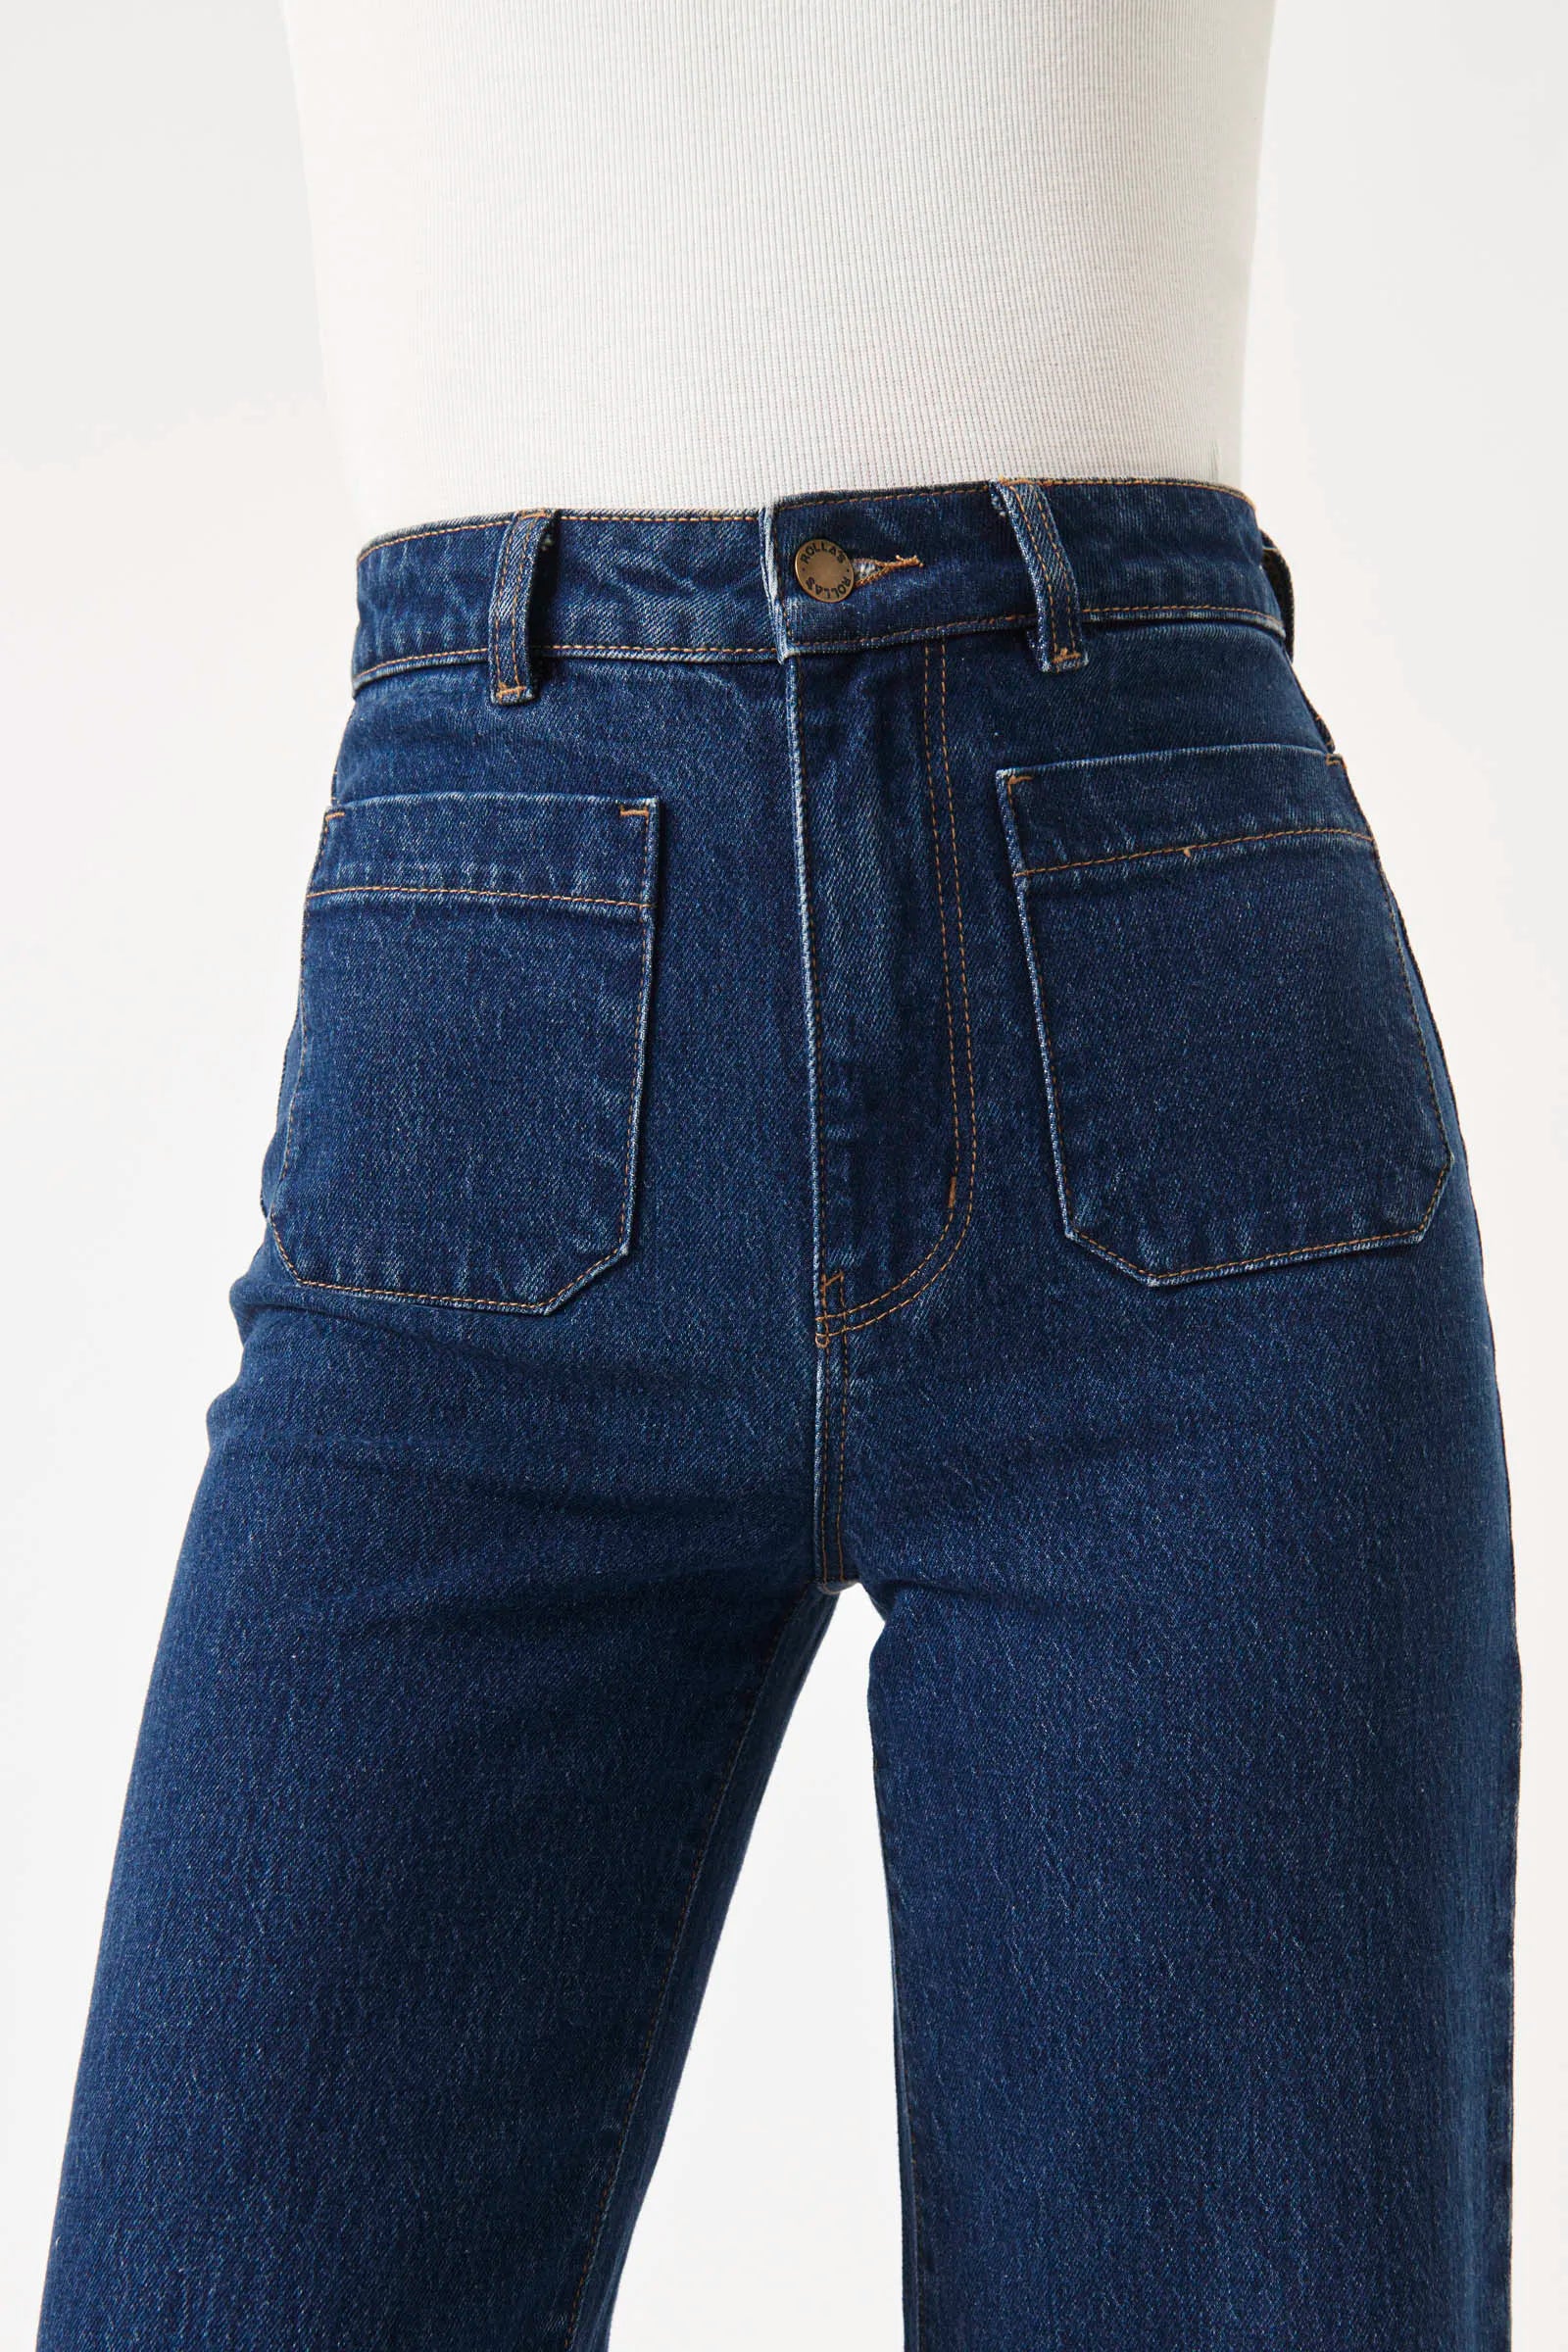 The Sailor Organic Dark Blue Jeans by Rolla&#39;s